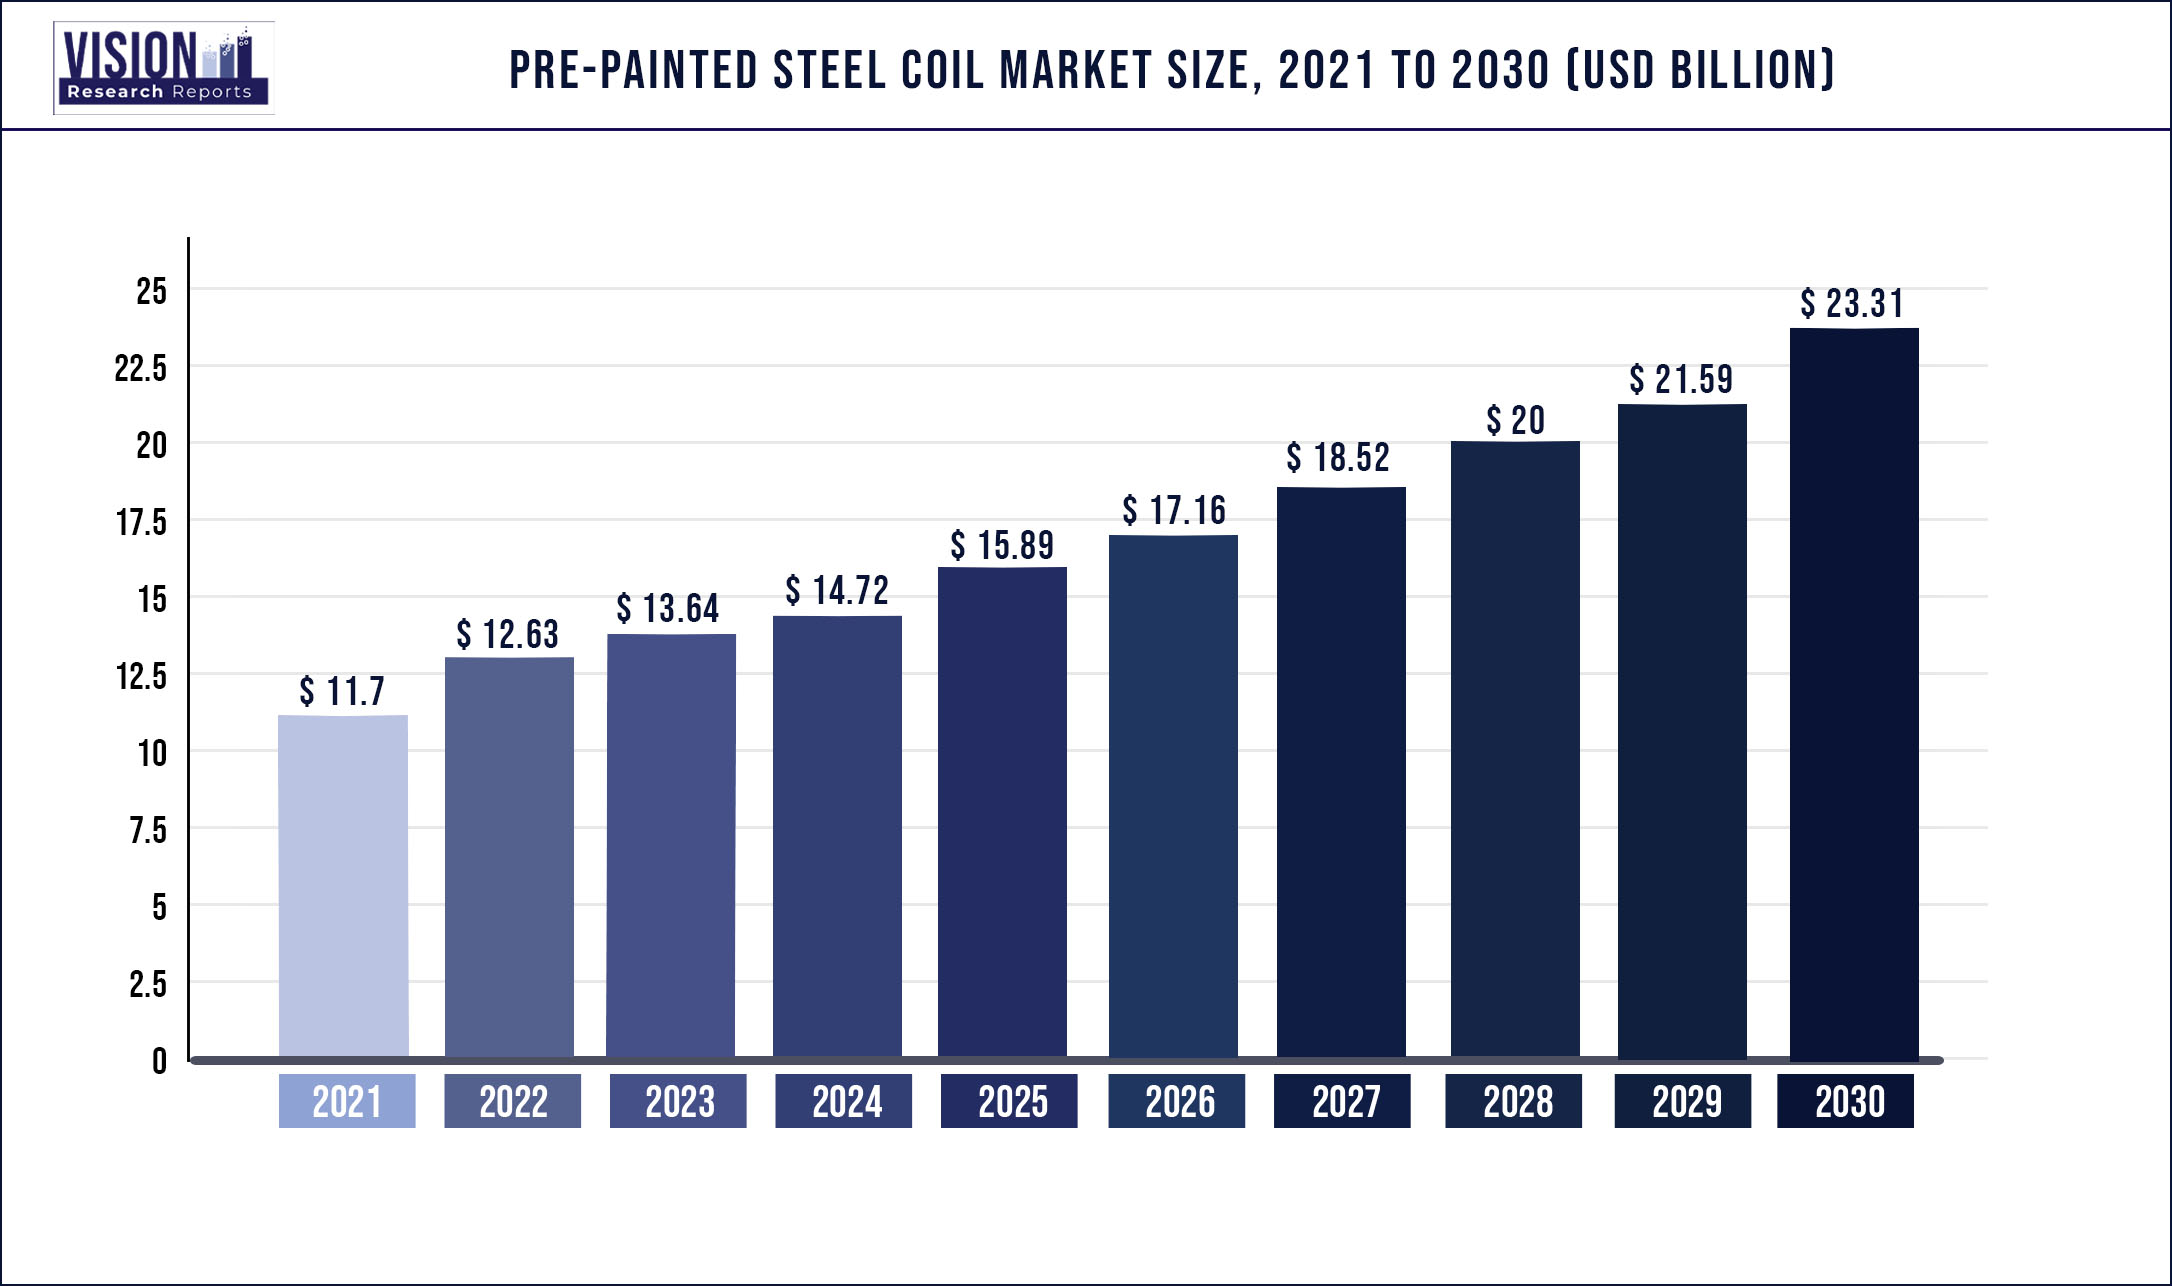 Pre-painted Steel Coil Market Size 2021 to 2030